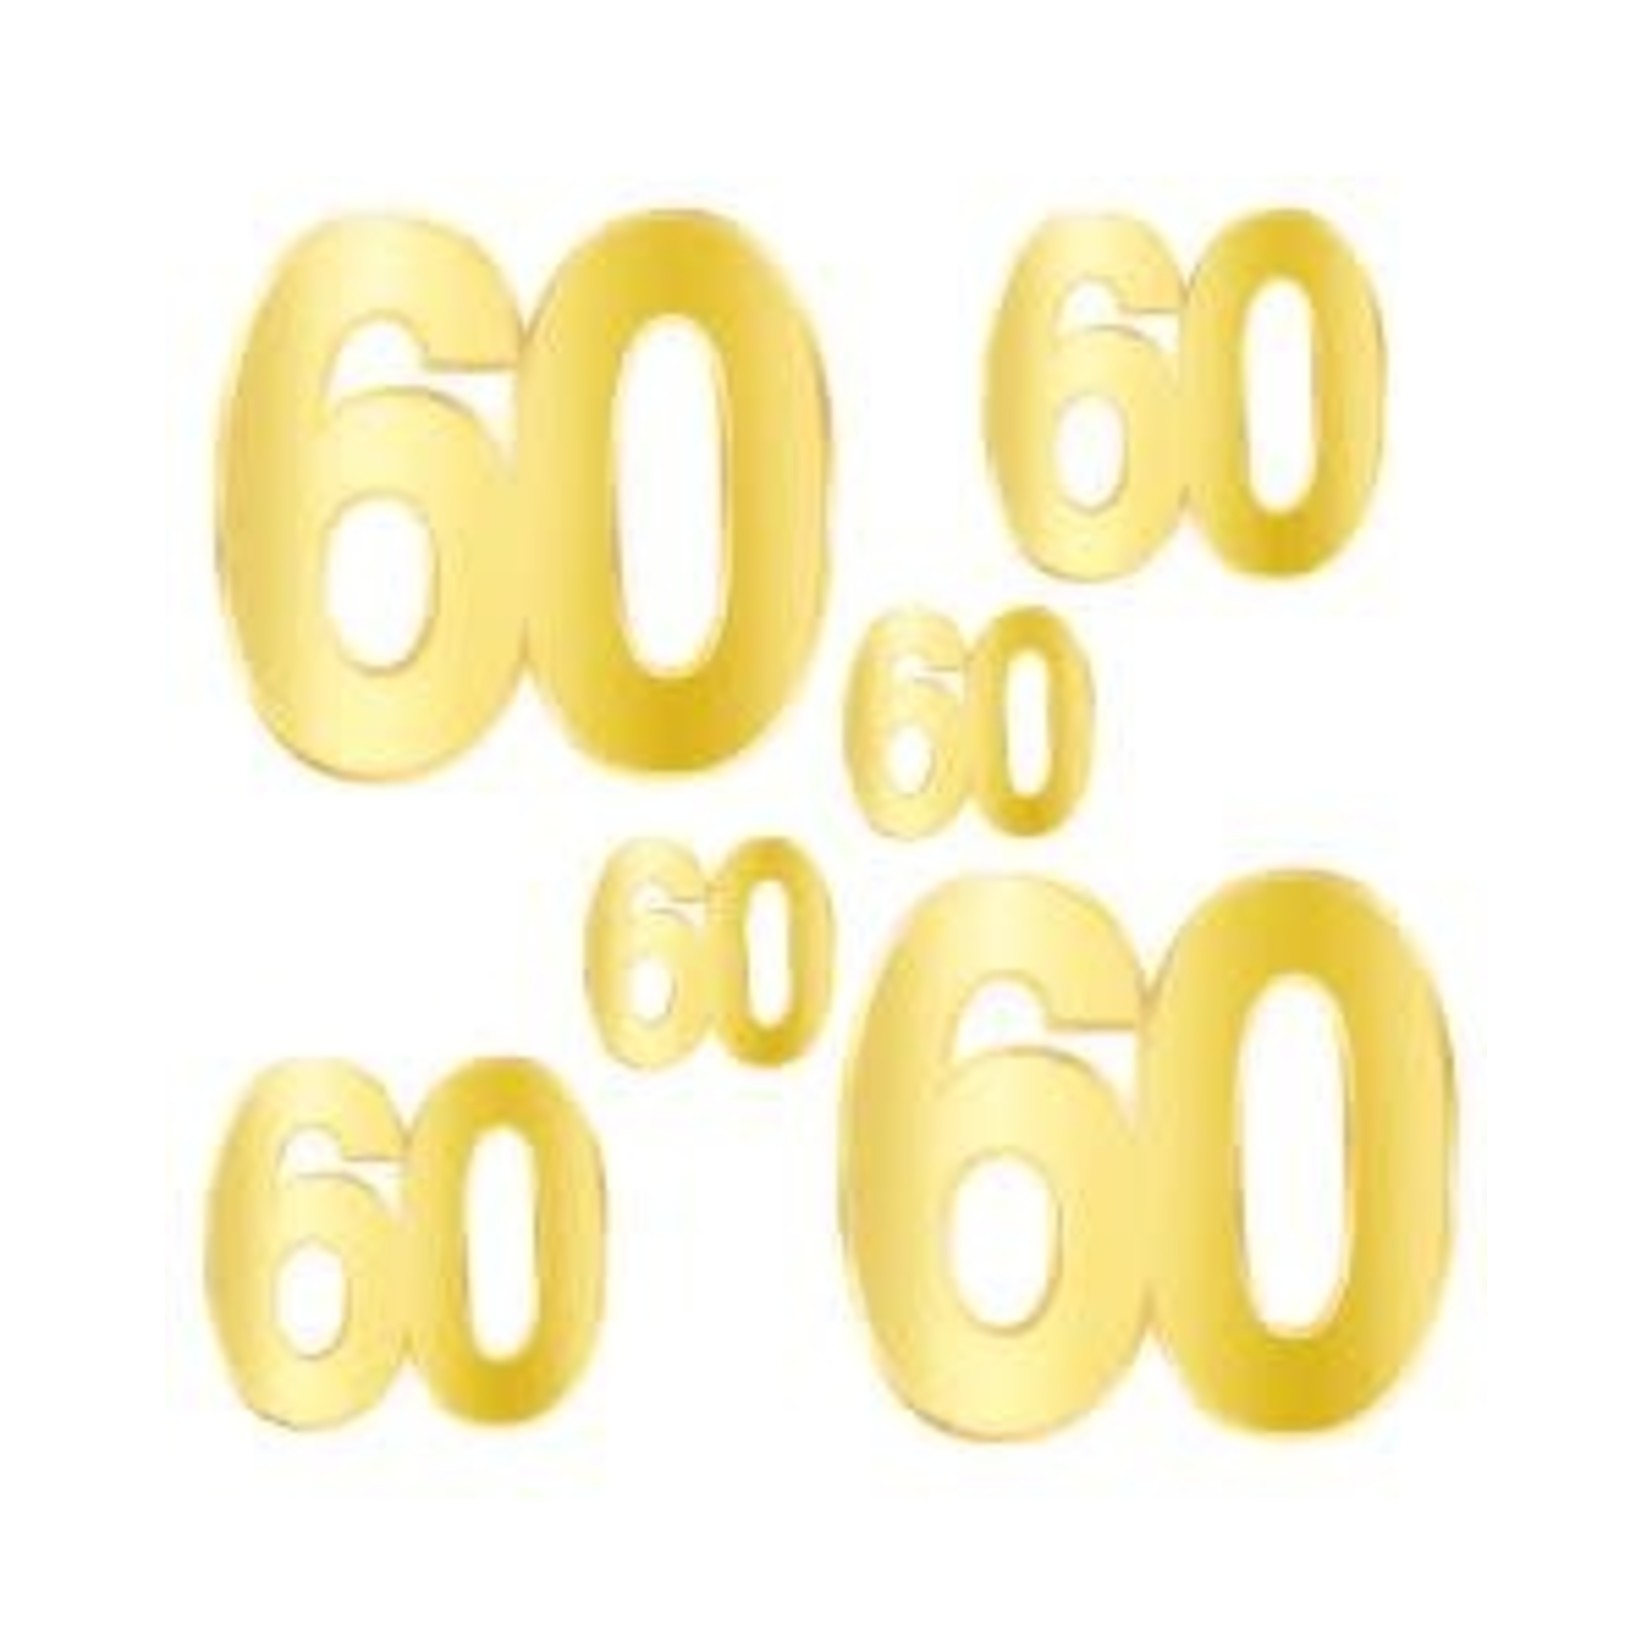 Beistle 60th Birthday Gold Foil Cutouts - 6ct.